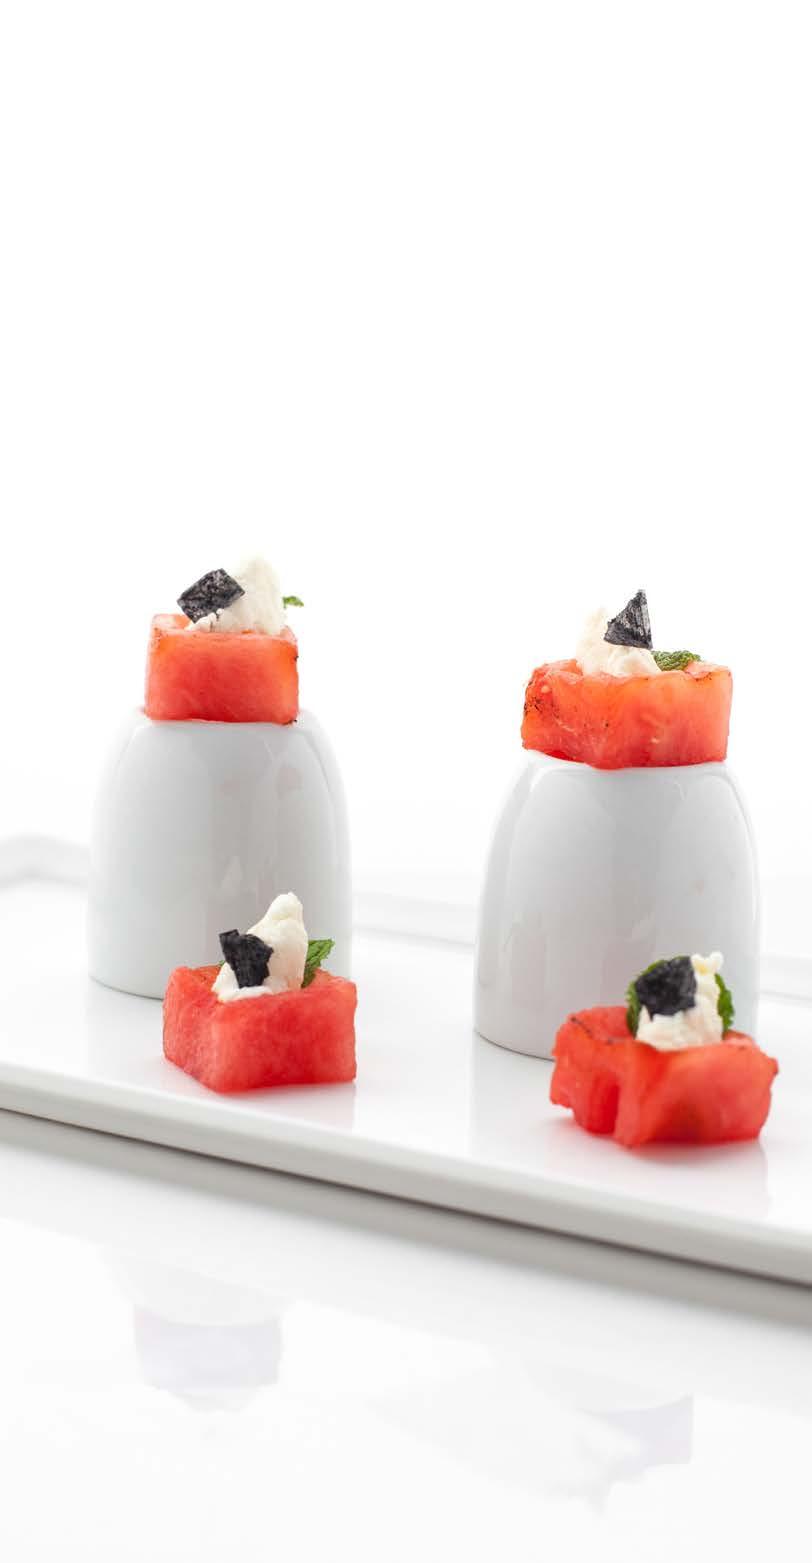 Small bites Big flavor WATERMELON CUPS ORDER TODAY - 312.829.